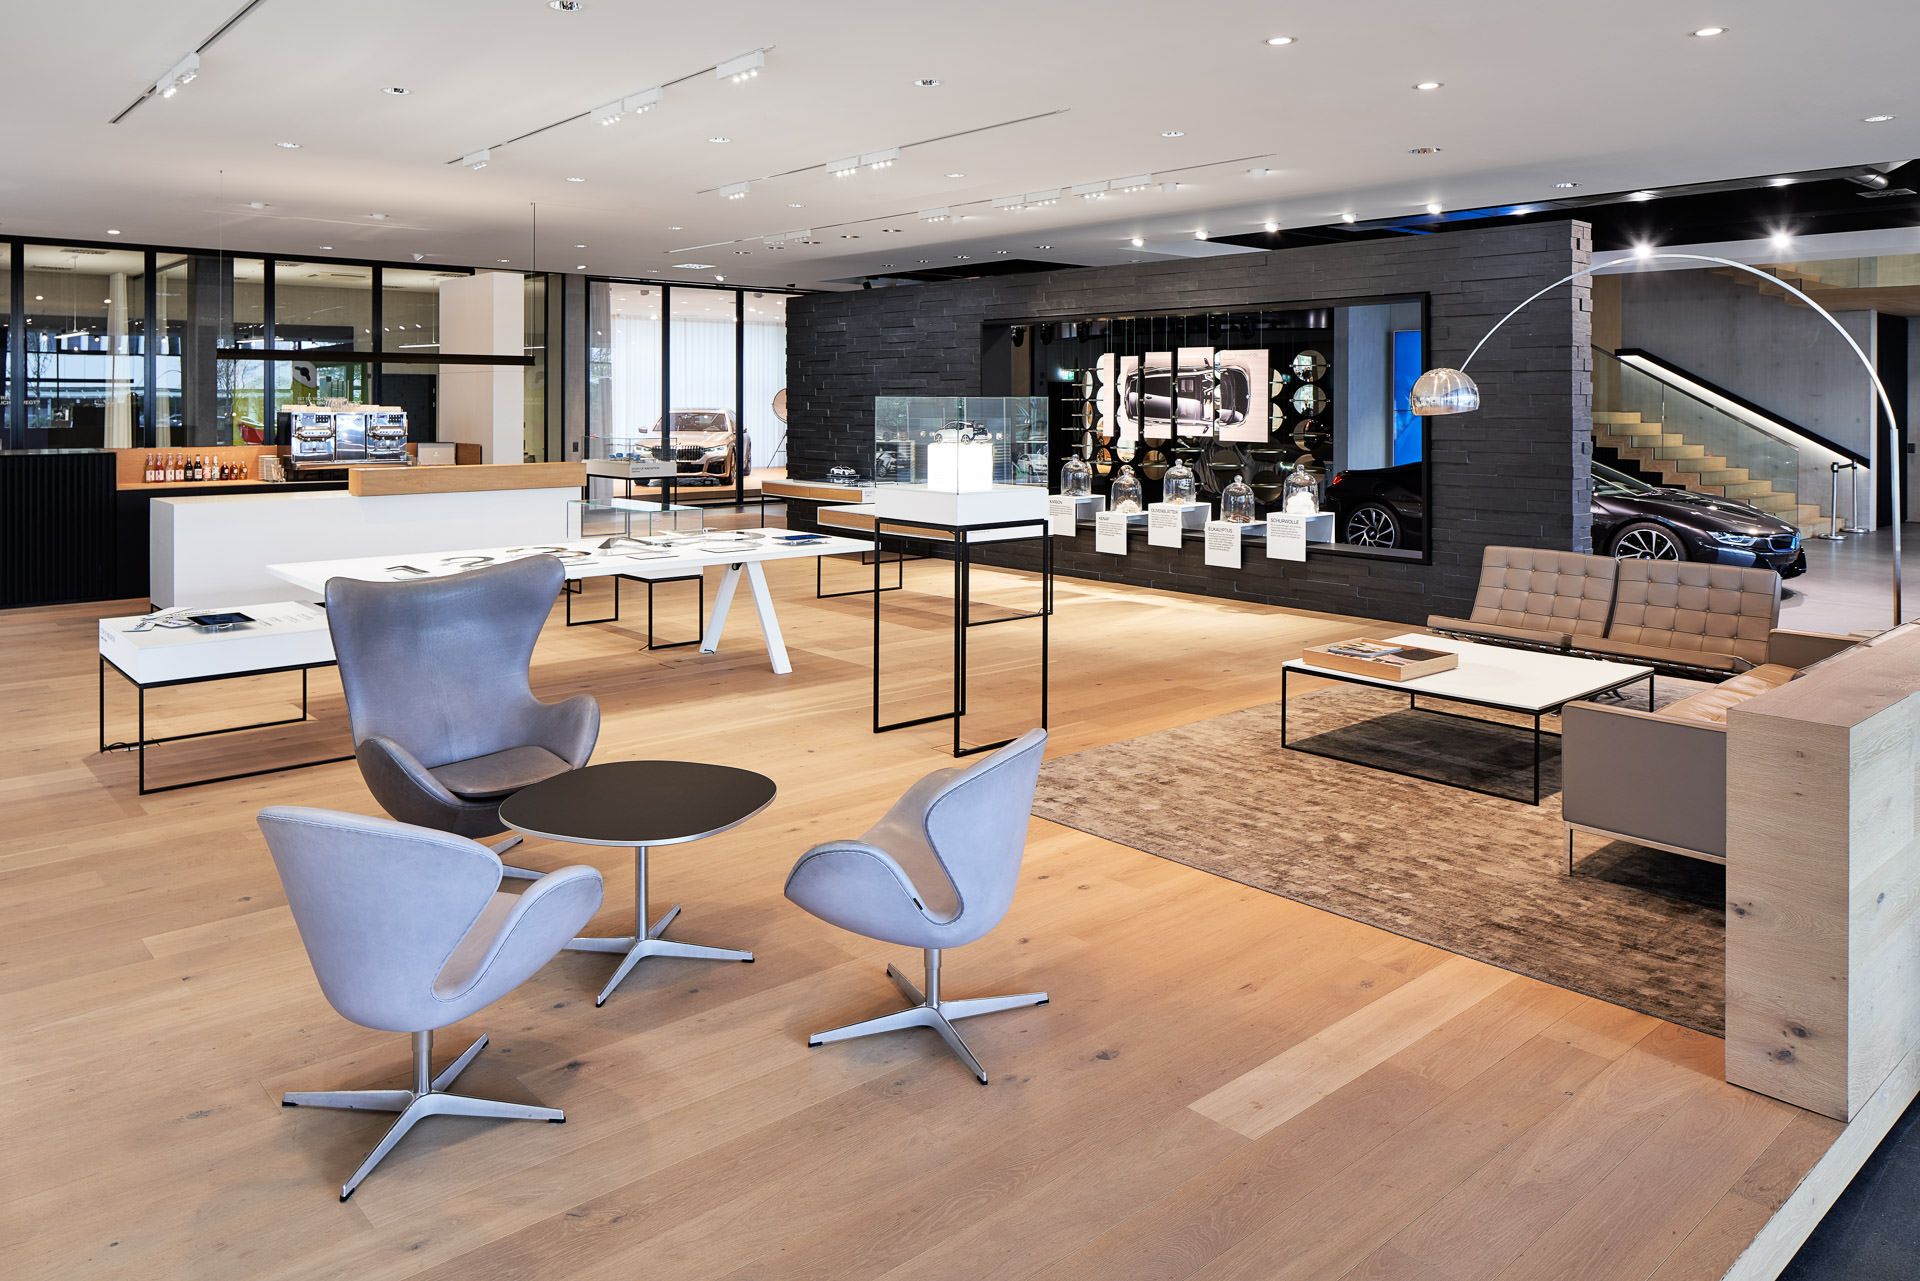 Exclusive lounge - BMW BEC - Interior Architecture Photography